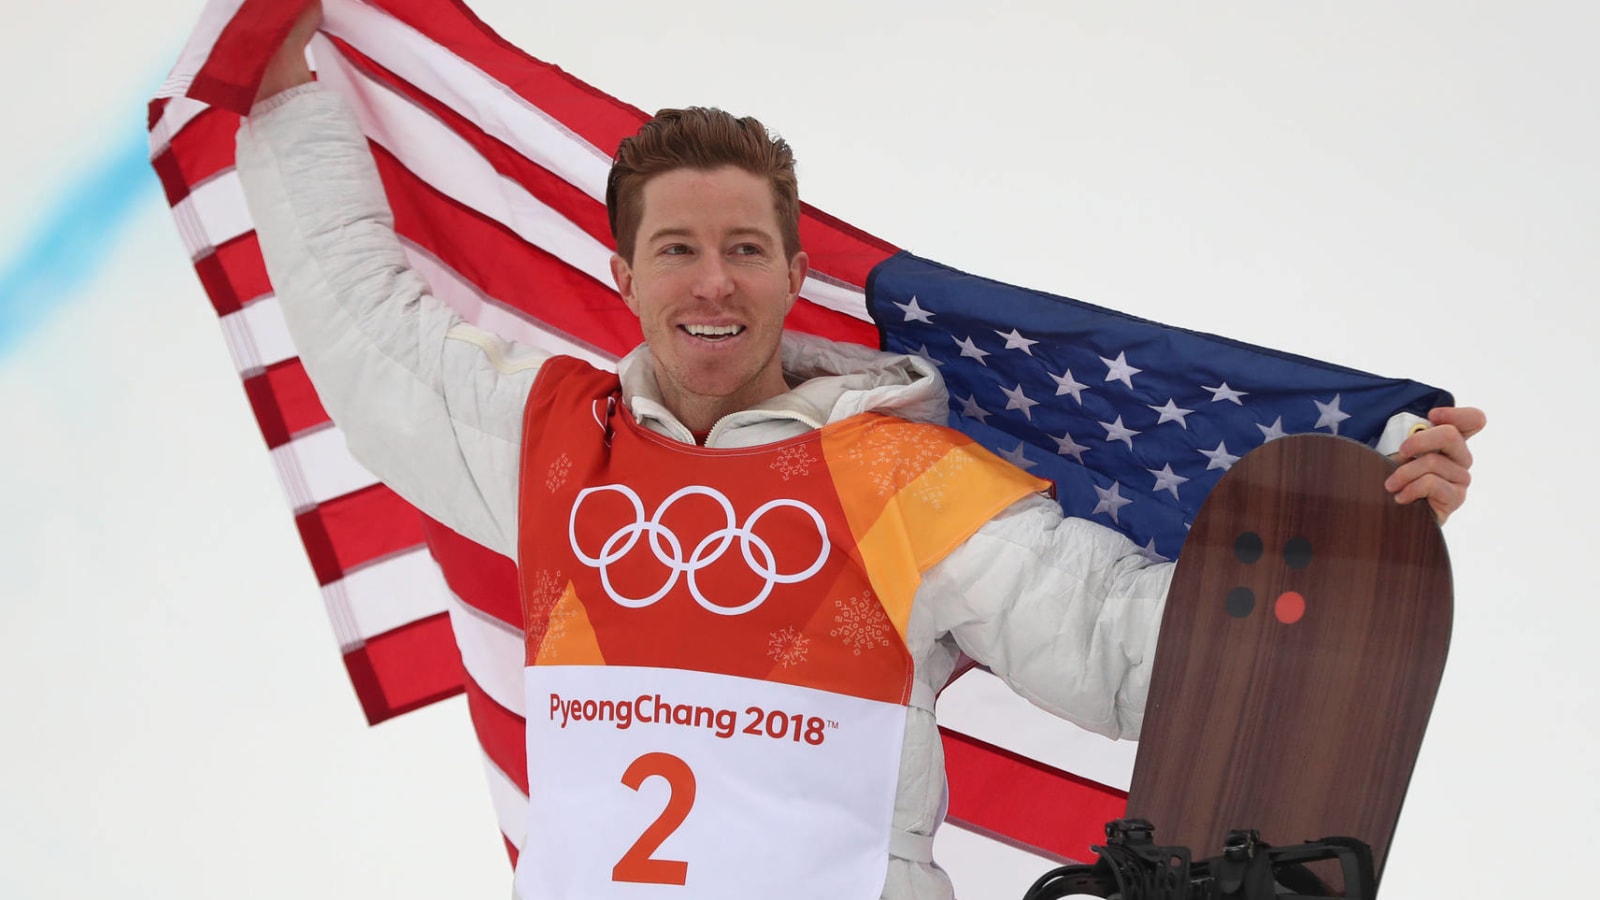 Look: Shaun White has cool Olympic tribute to celebrity who died last year